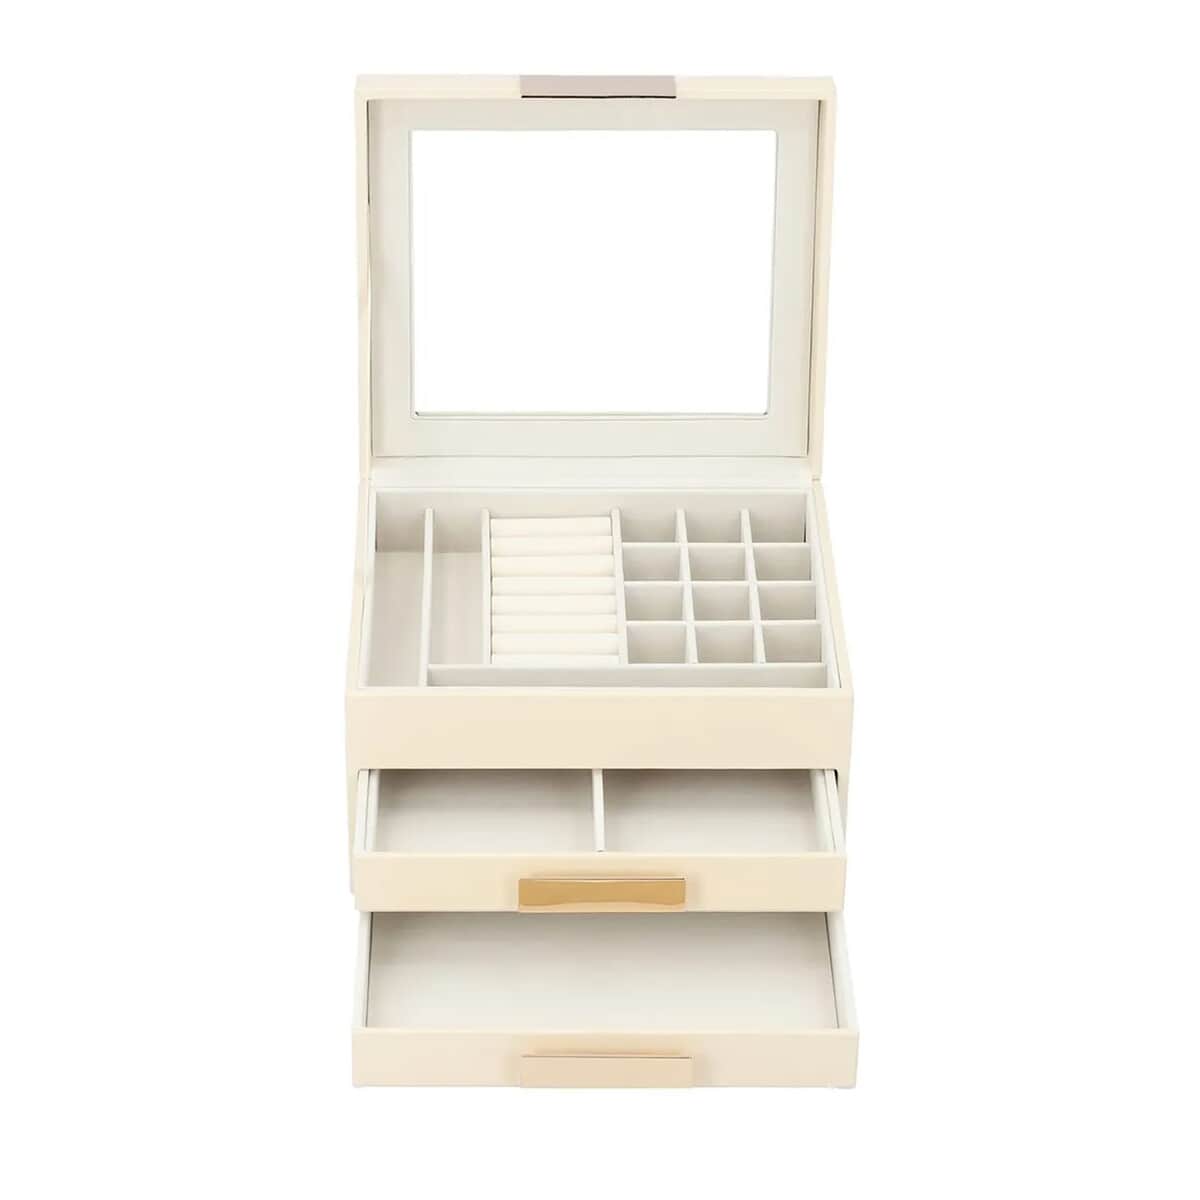 DOORBUSTER Beige Three Layer Faux Leather Jewelry Box with Anti Tarnish Lining and 2 Removable Tray (9.1"x8"x5.3") image number 6